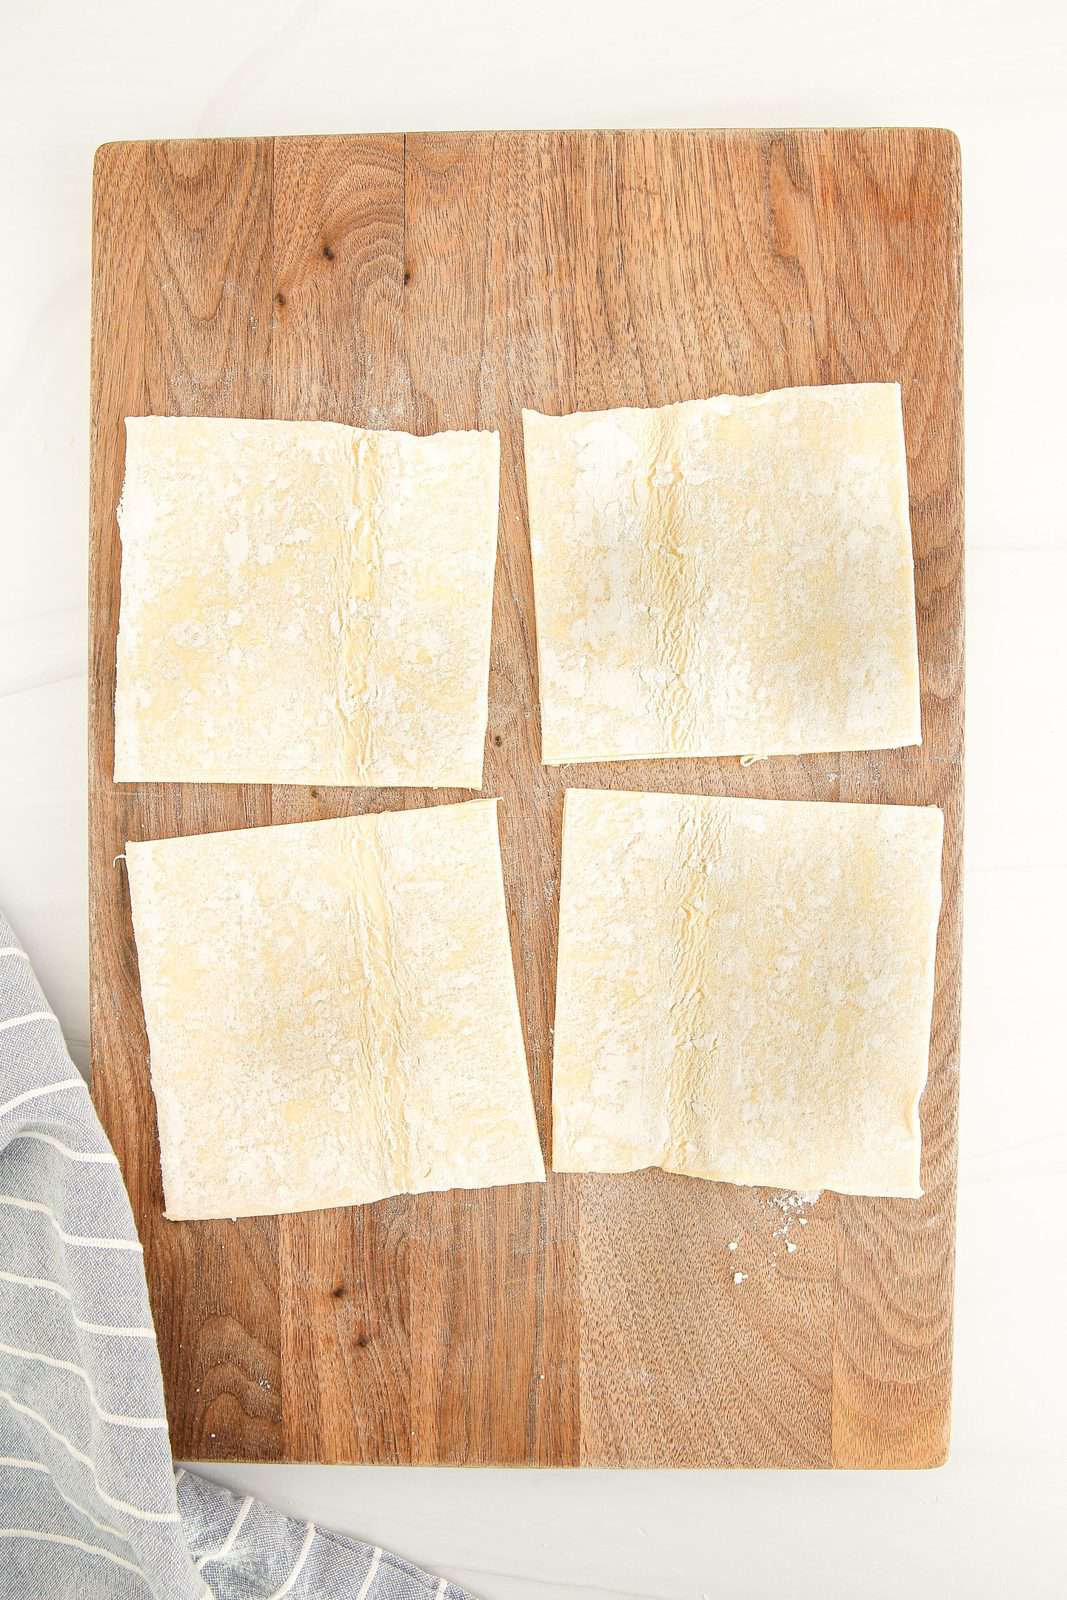 Puff pastry sheet cut into squares.